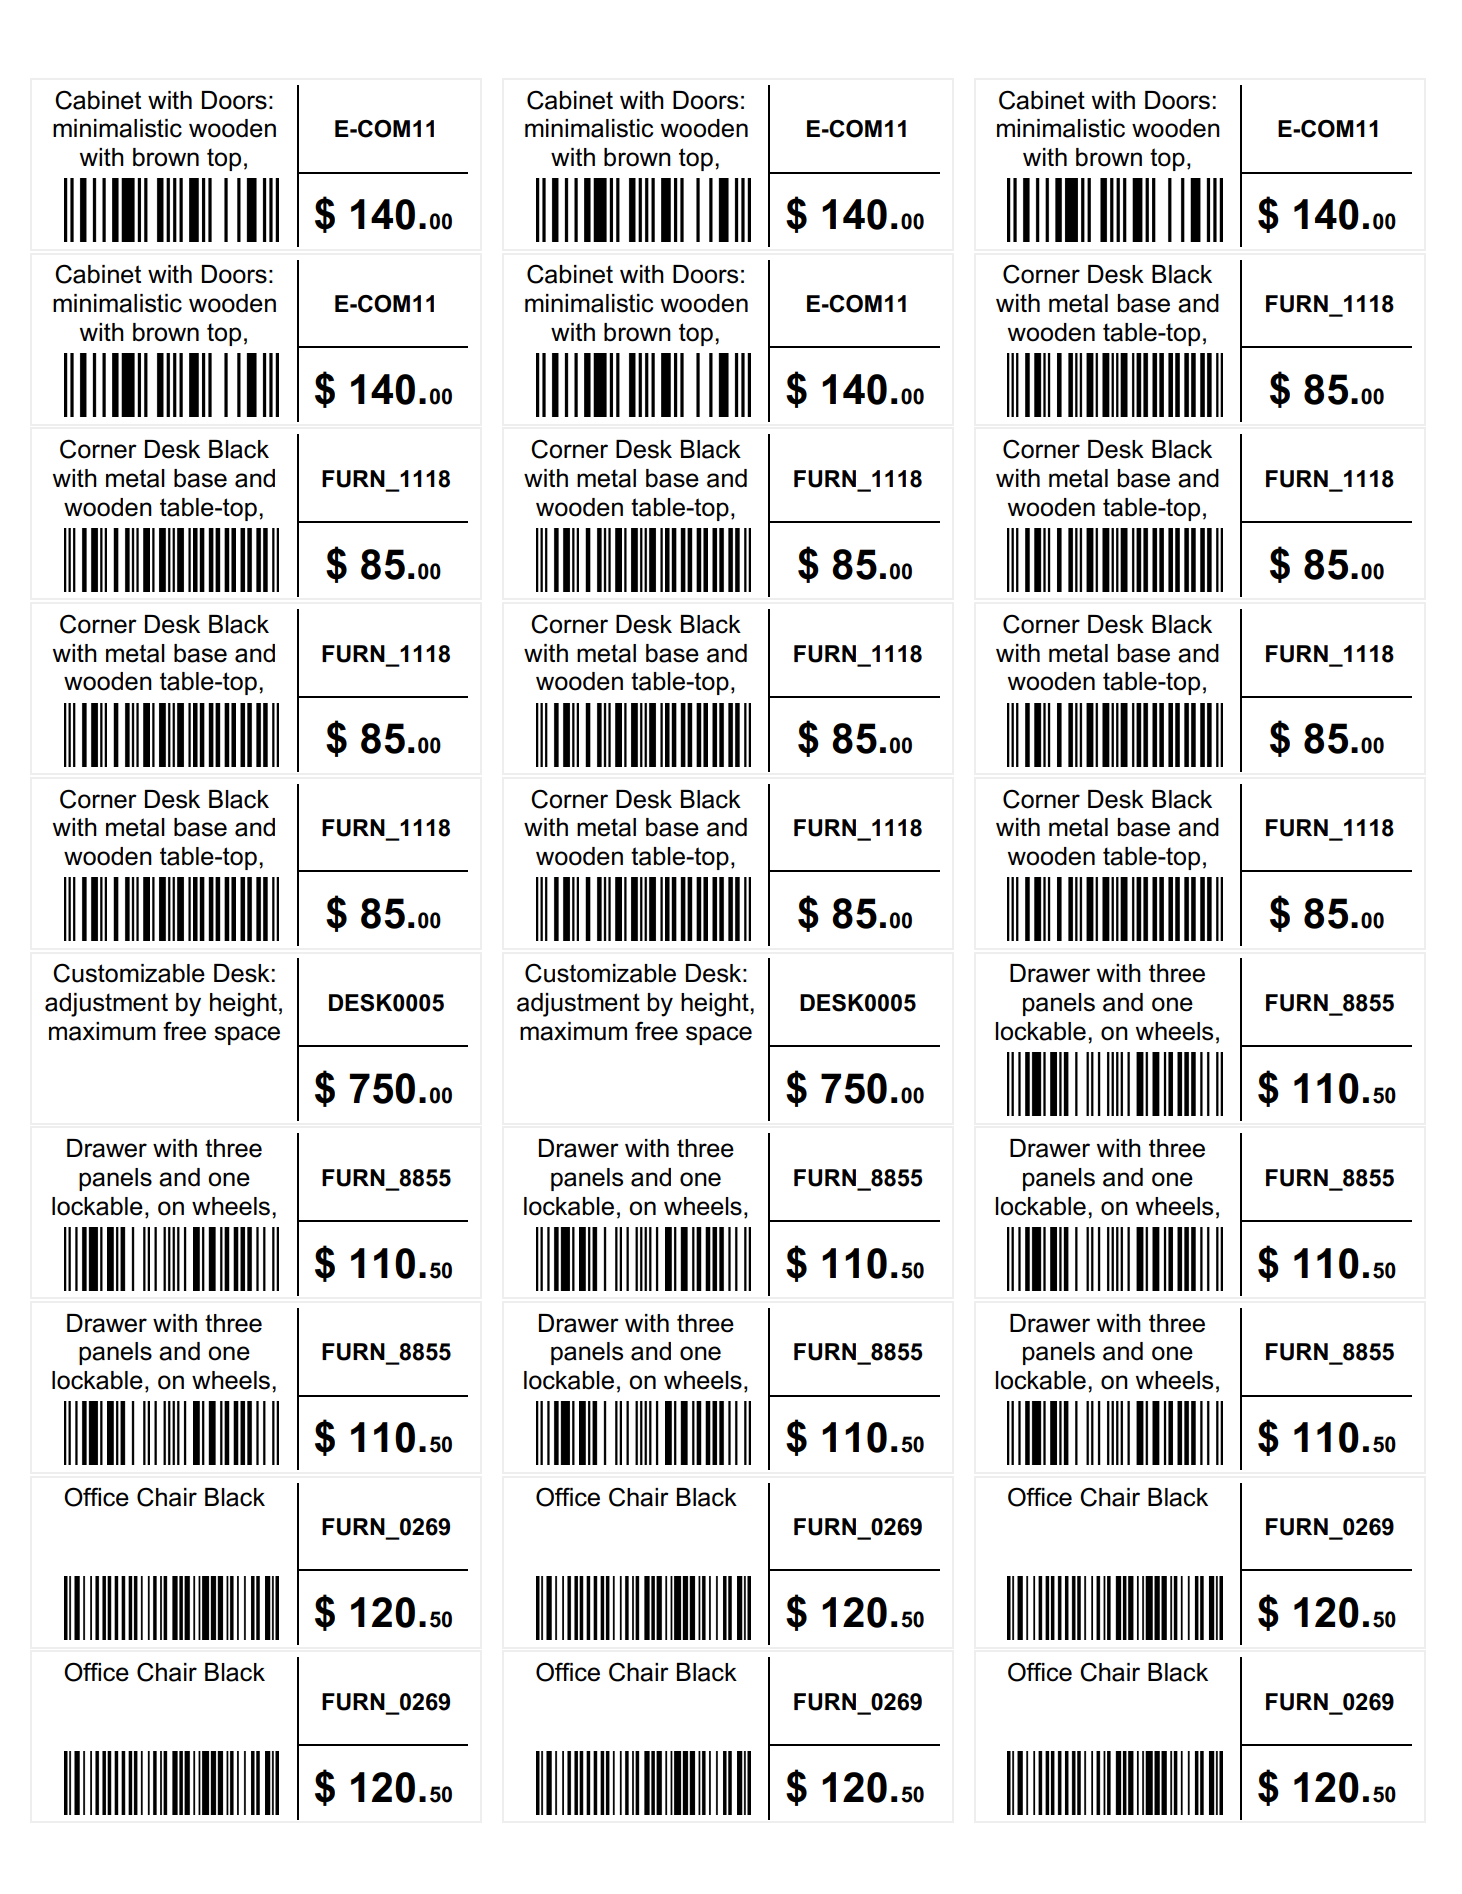 Odoo 15.0 us letter barcode product label 66 x 25 mm